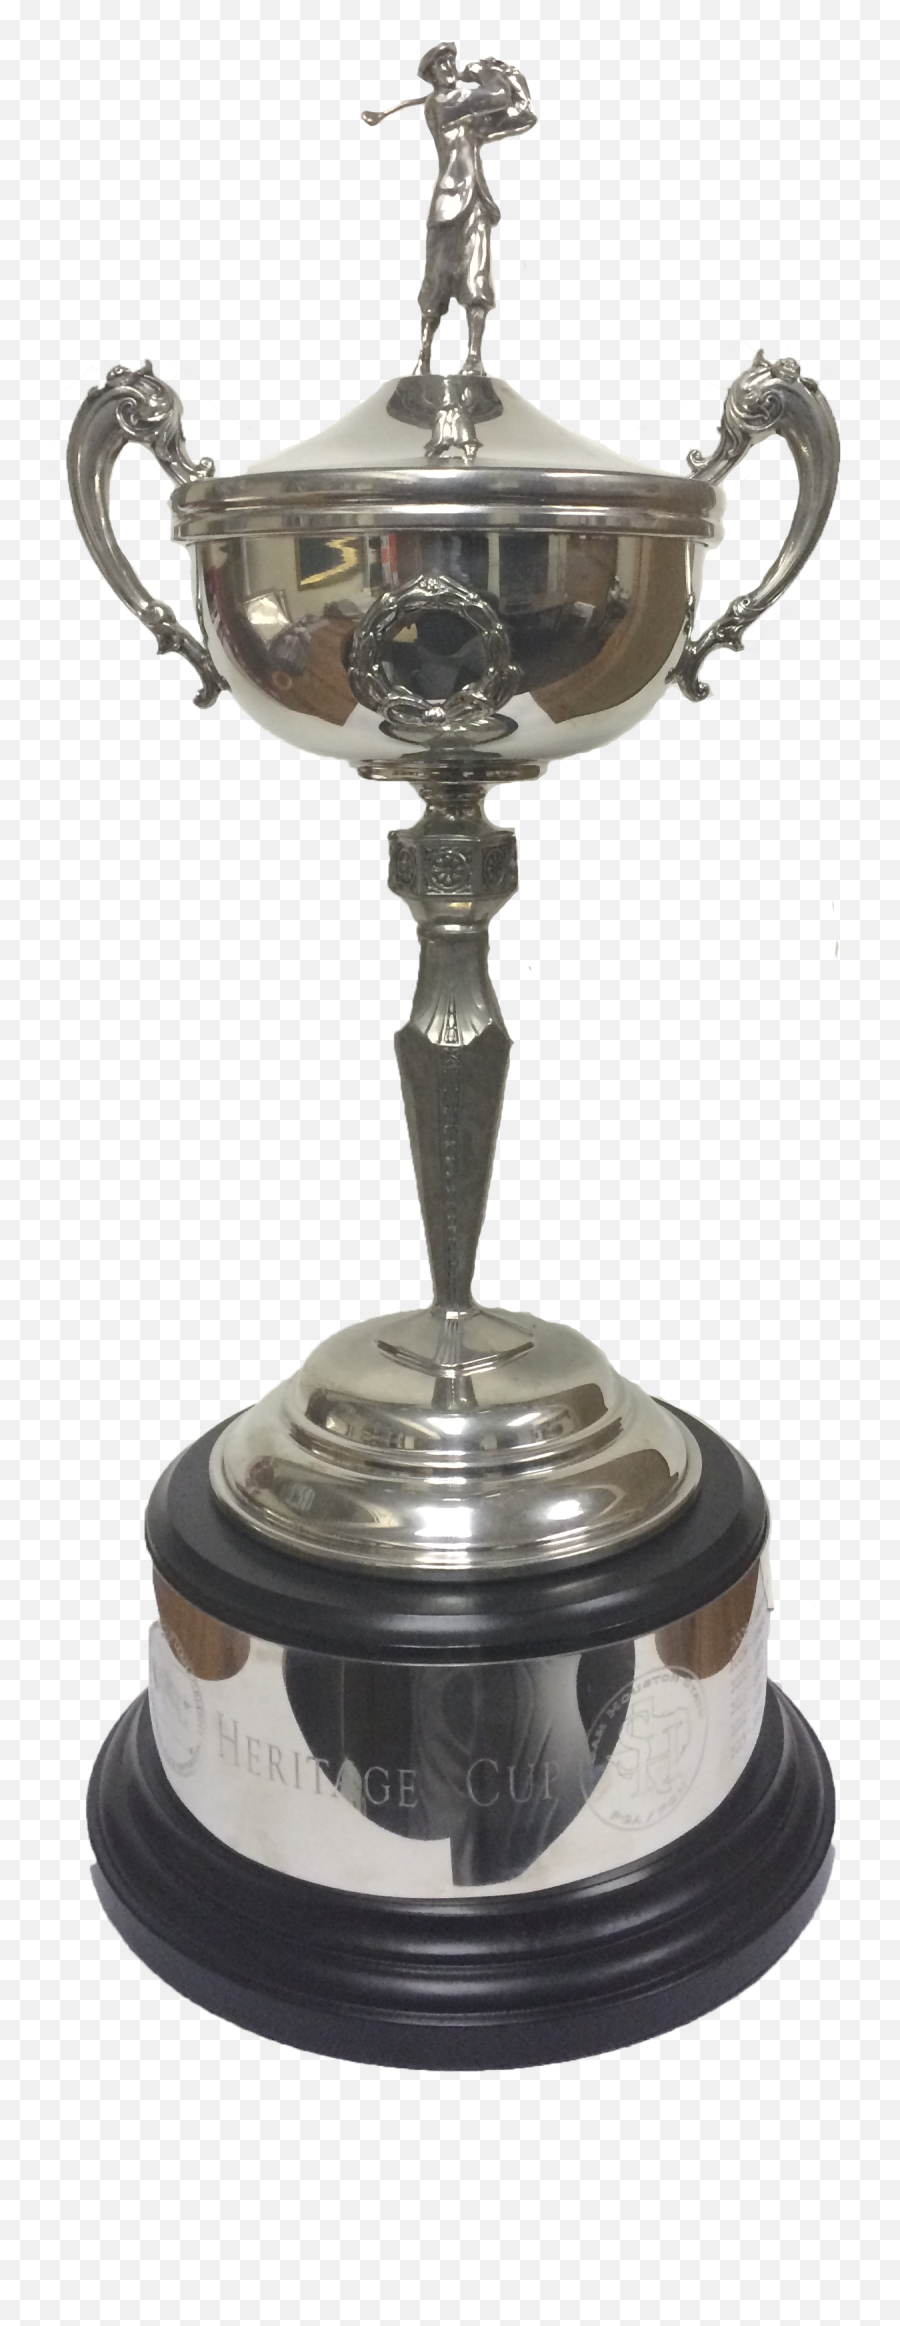 Heritage Cup Pngpng Pga Golf Management - Antique,Glass Cup Png